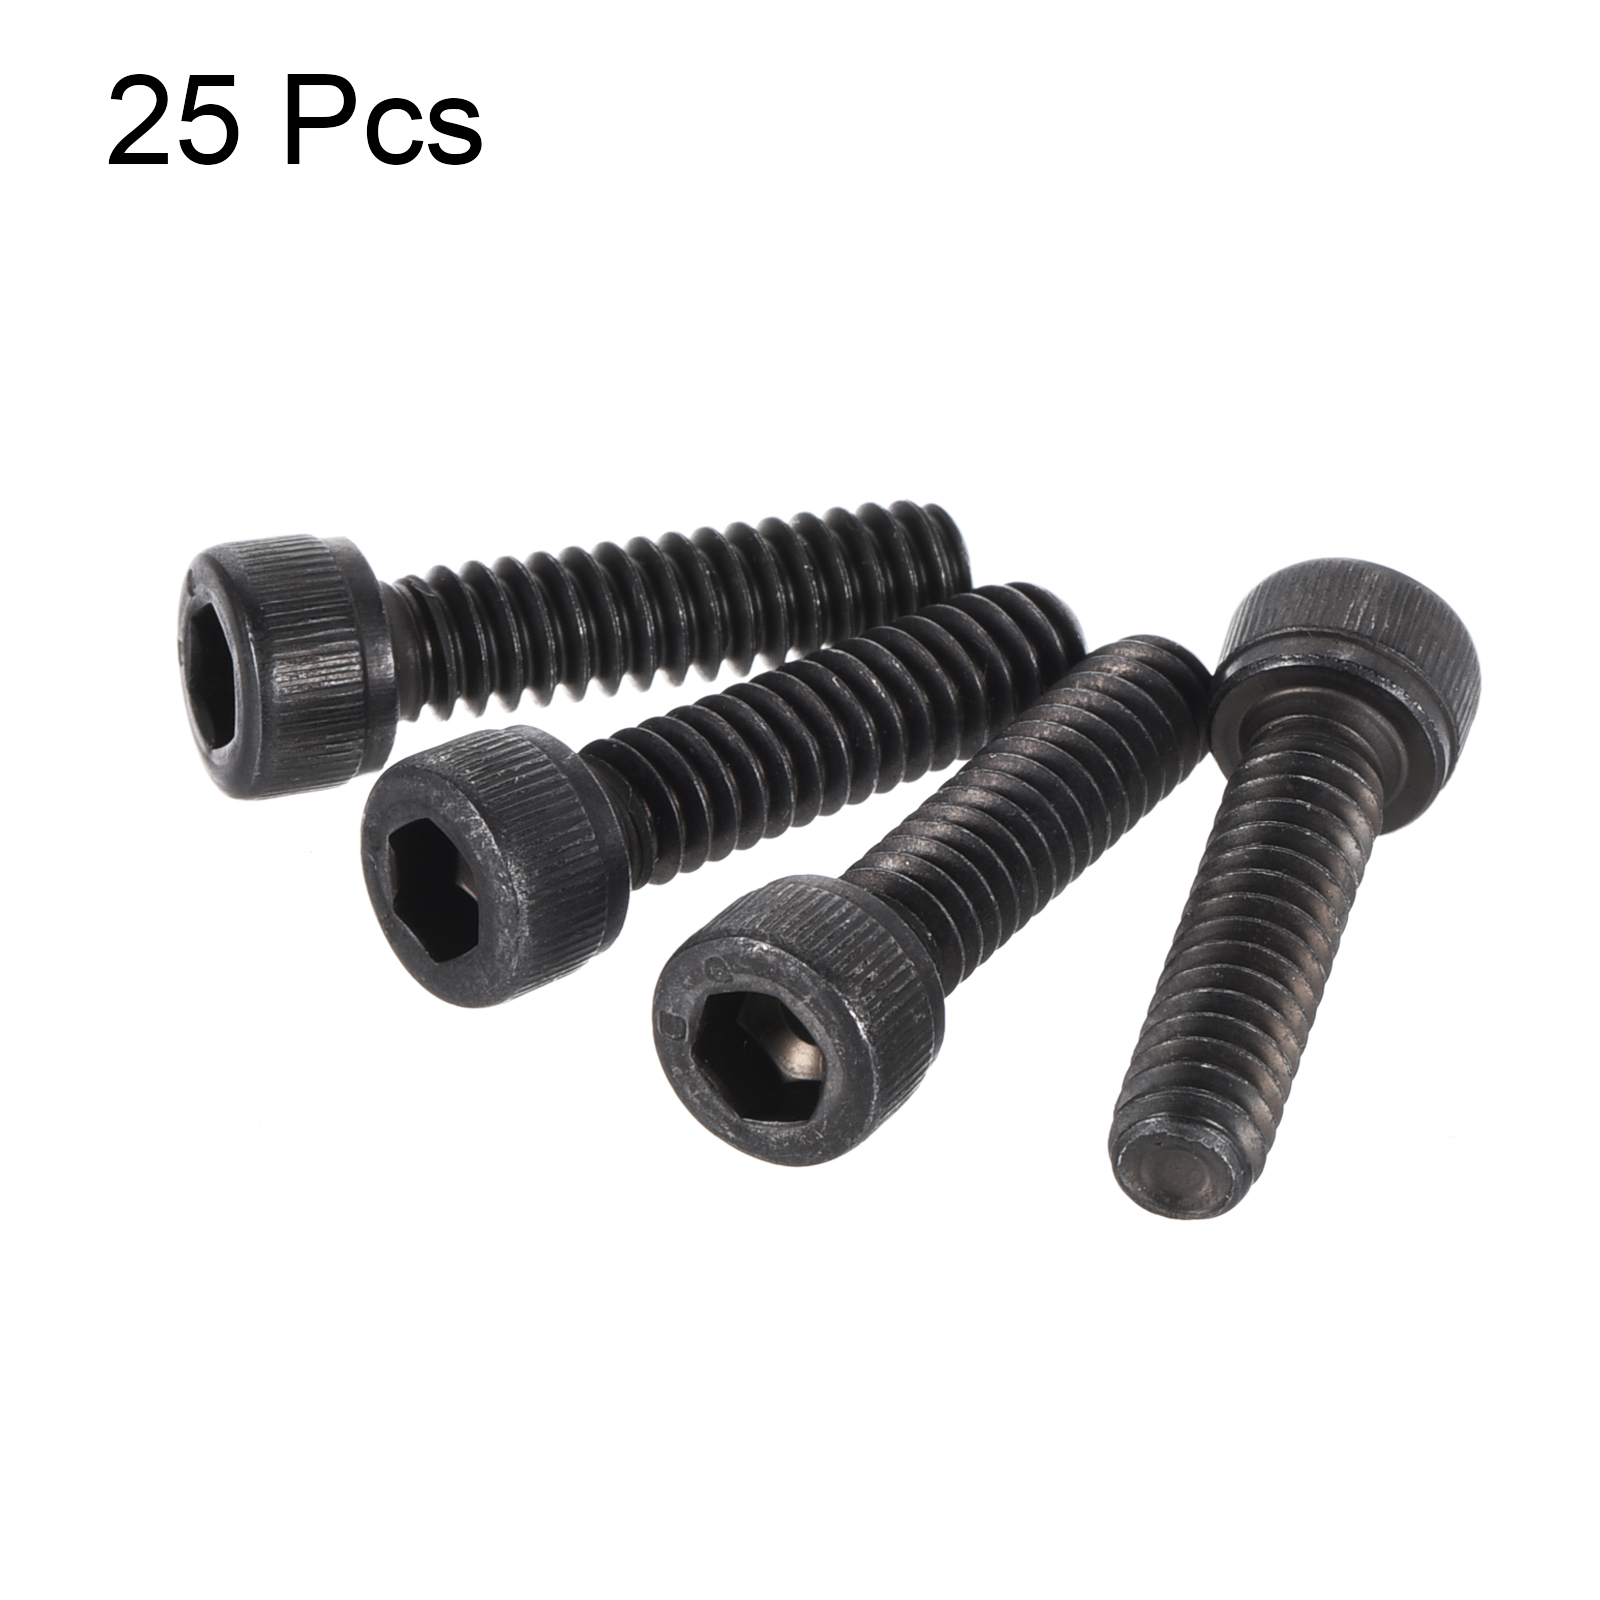 #10-24x3/4" Hex Socket Head Bolts 12.9 Alloy Steel 25 Pack - image 3 of 5